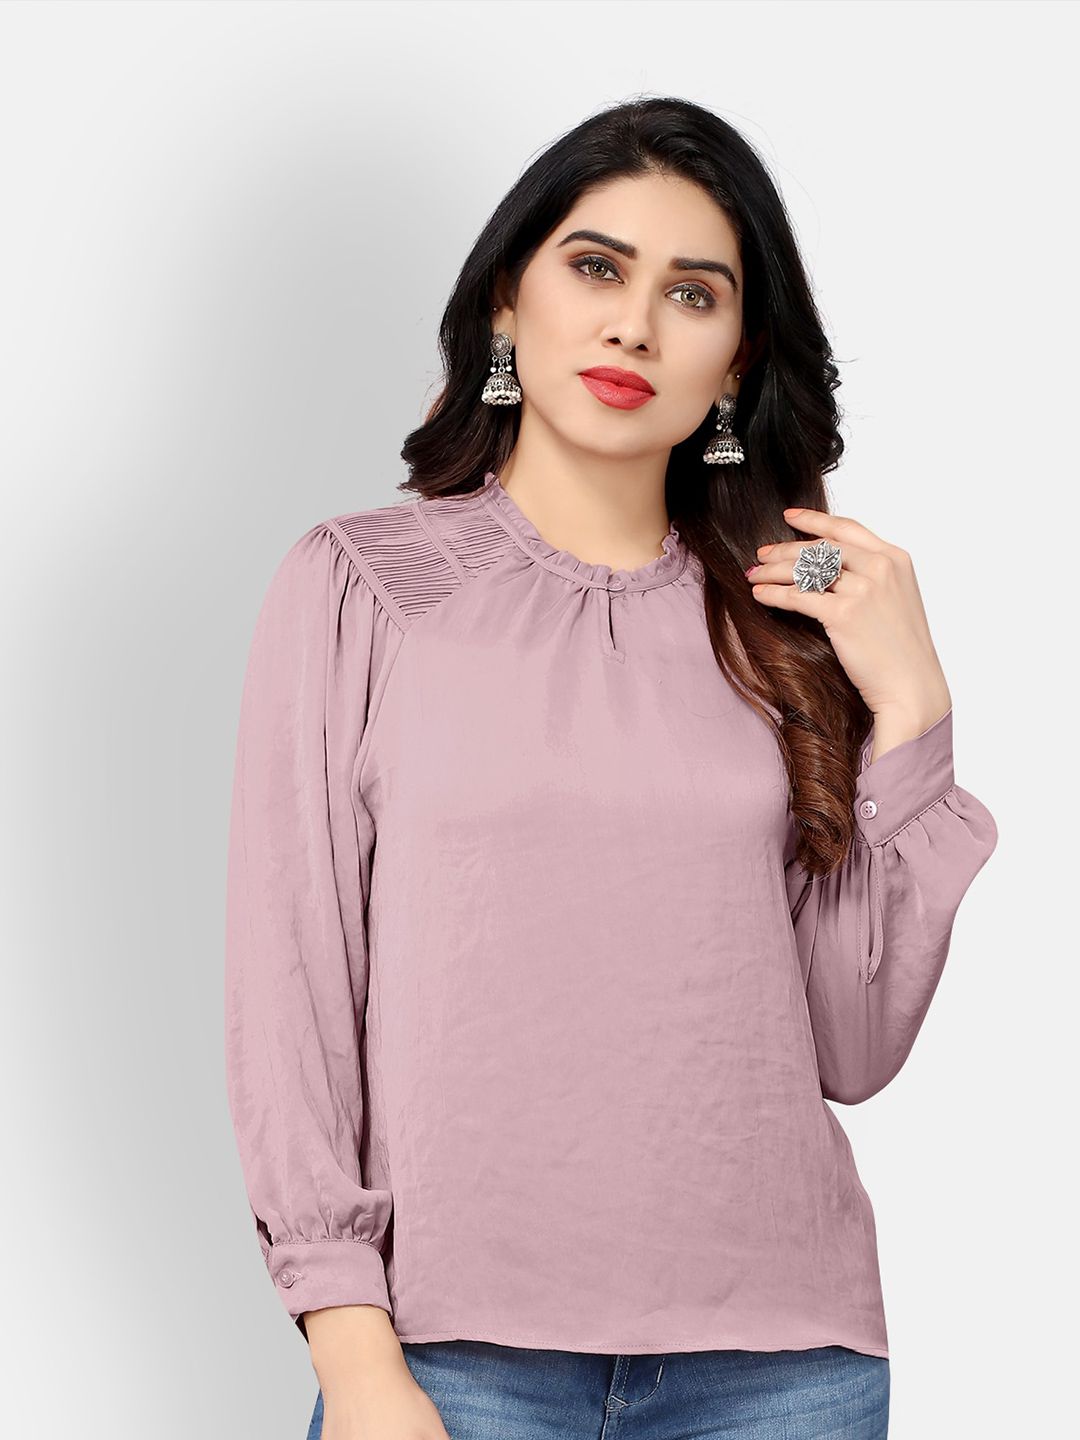 Mclothings Hummer Gathered Keyhole Neck Puffed Sleeves Satin Top Price in India